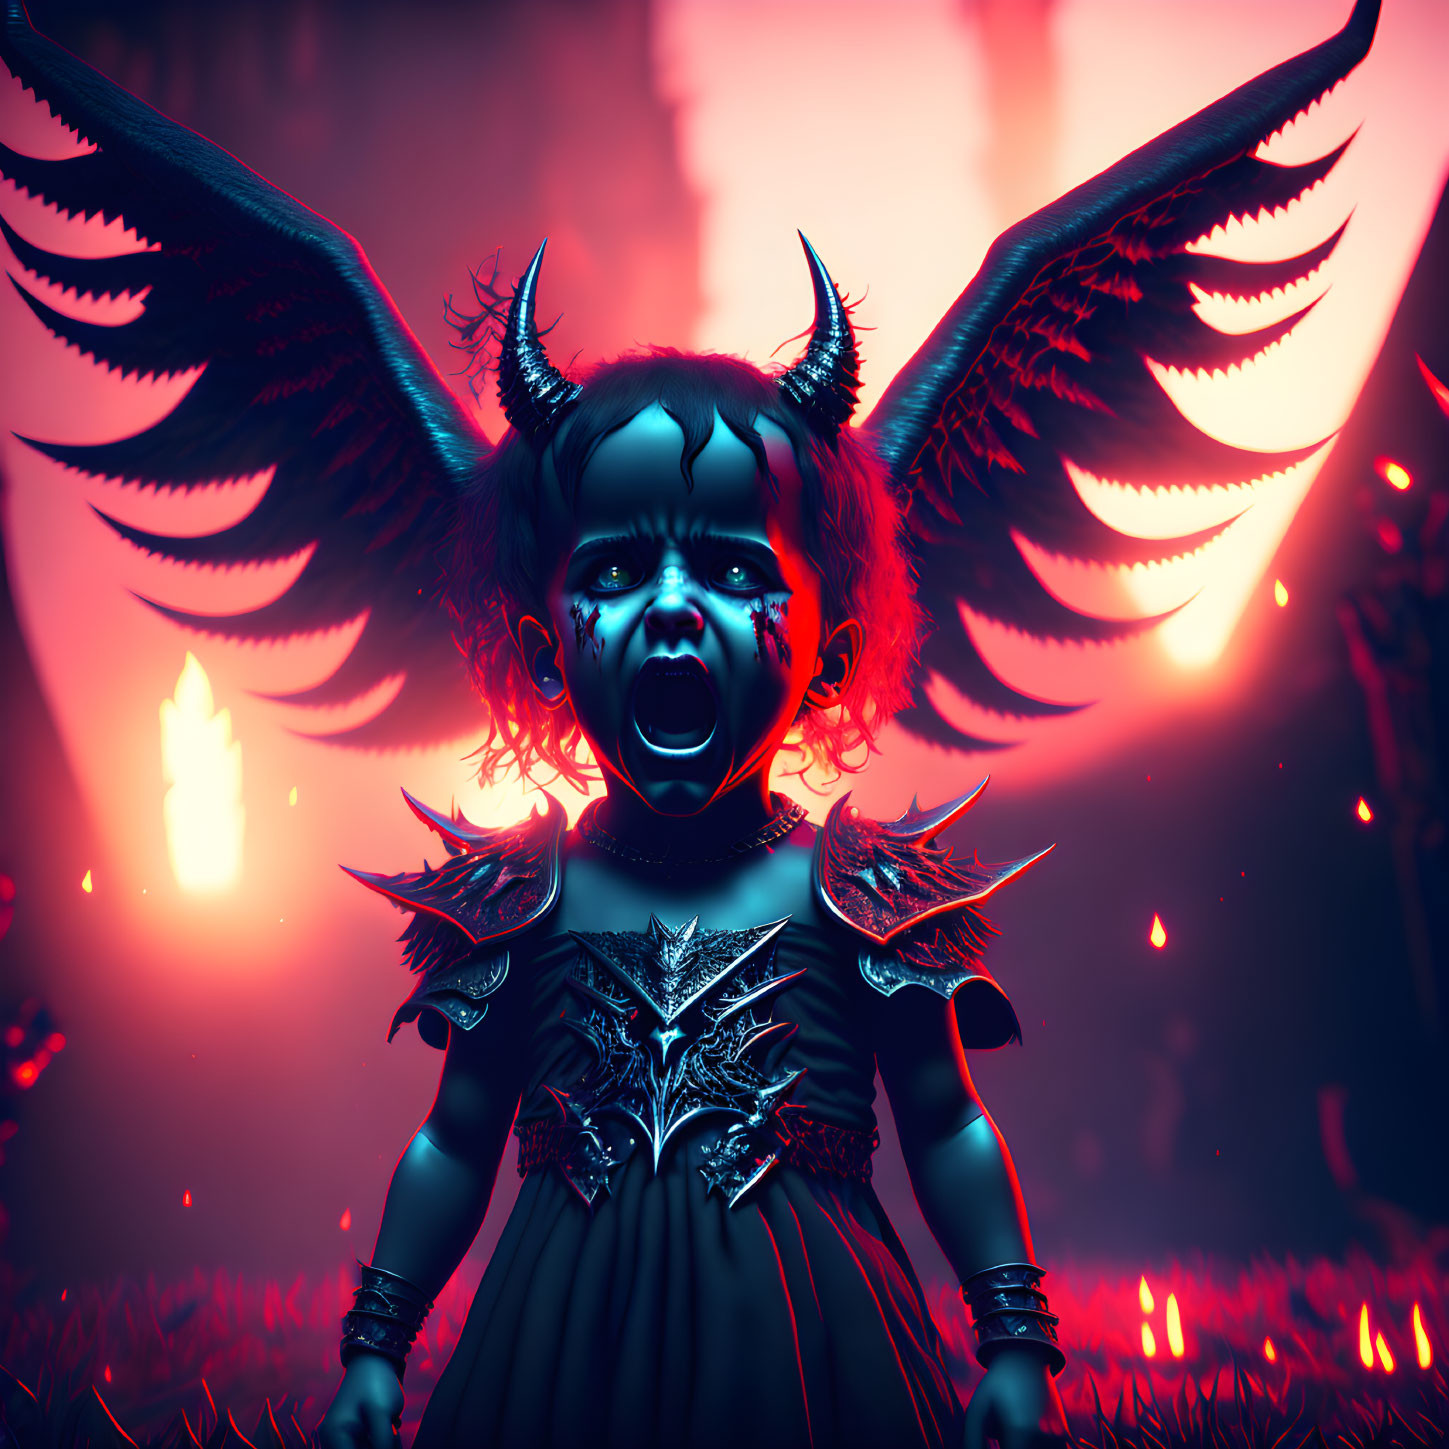 Dark 3D render of demonic baby with wings and armor in eerie environment